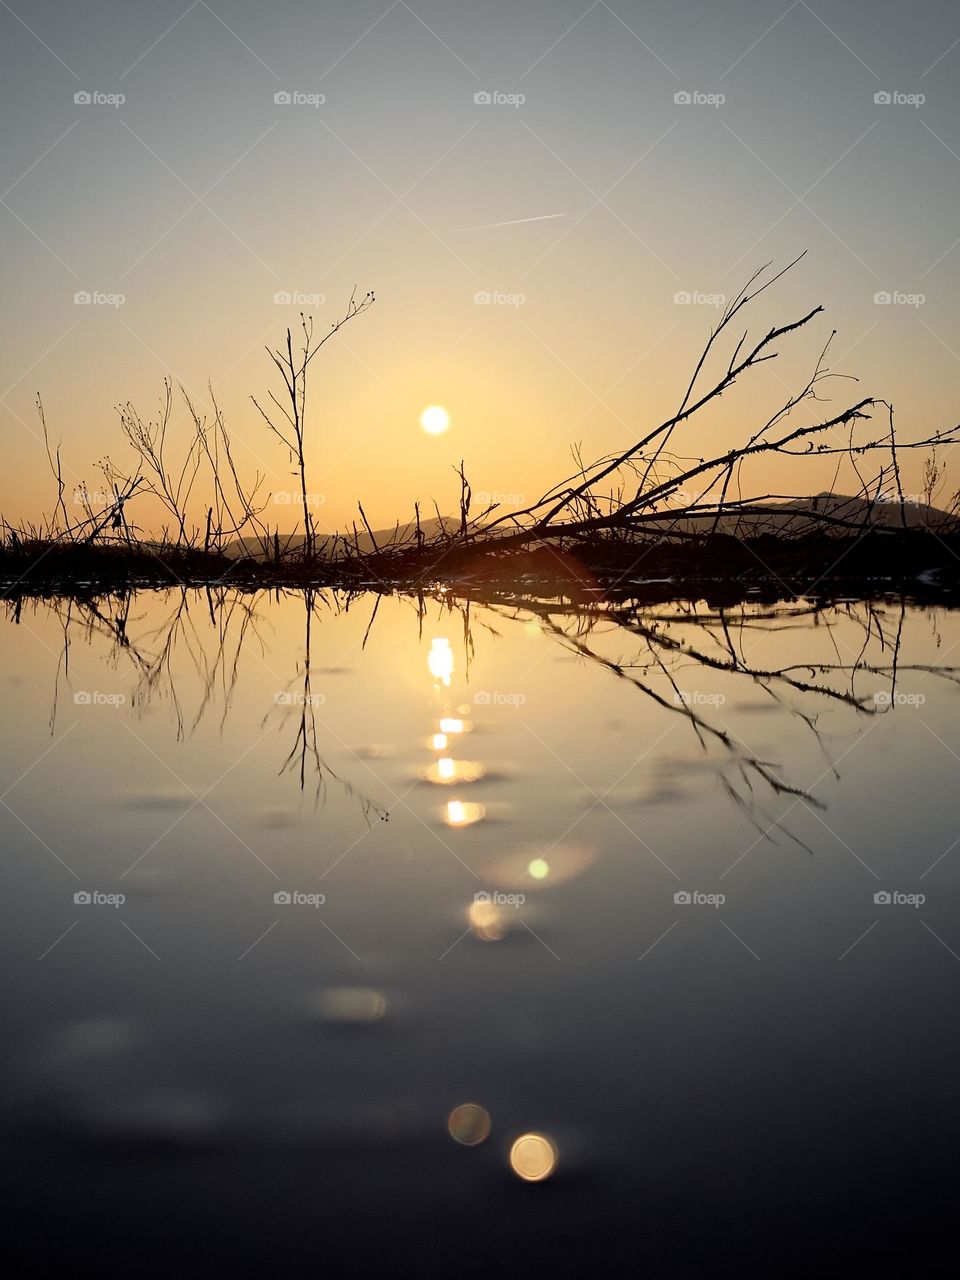 reflection of the sun in a puddle